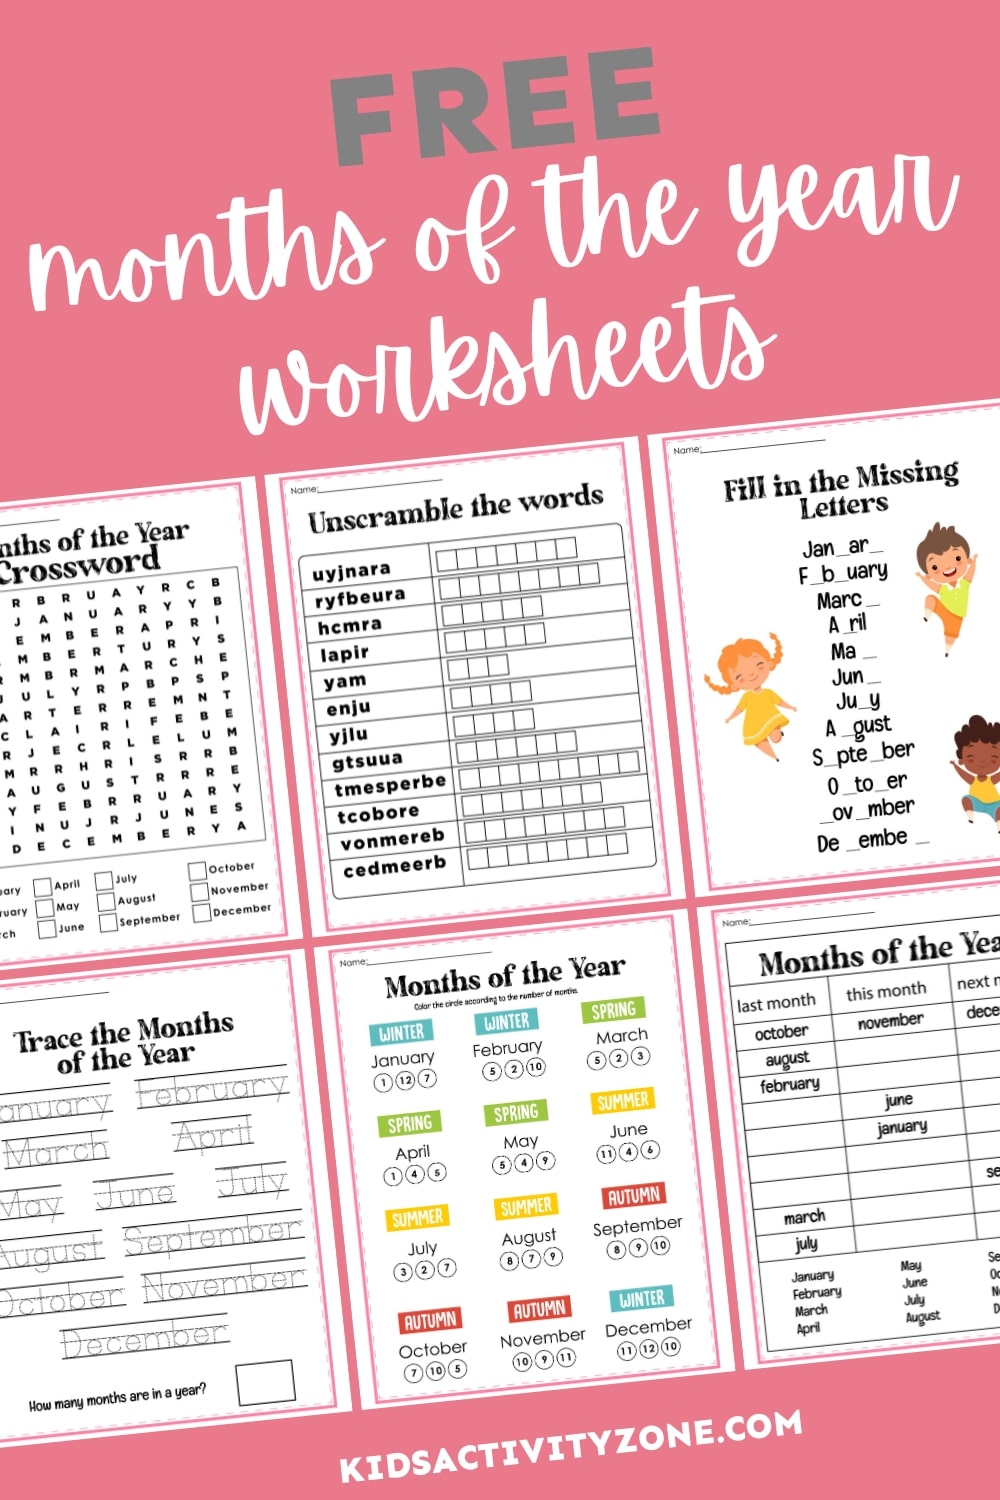 Months of the Year Worksheets - Featured Image